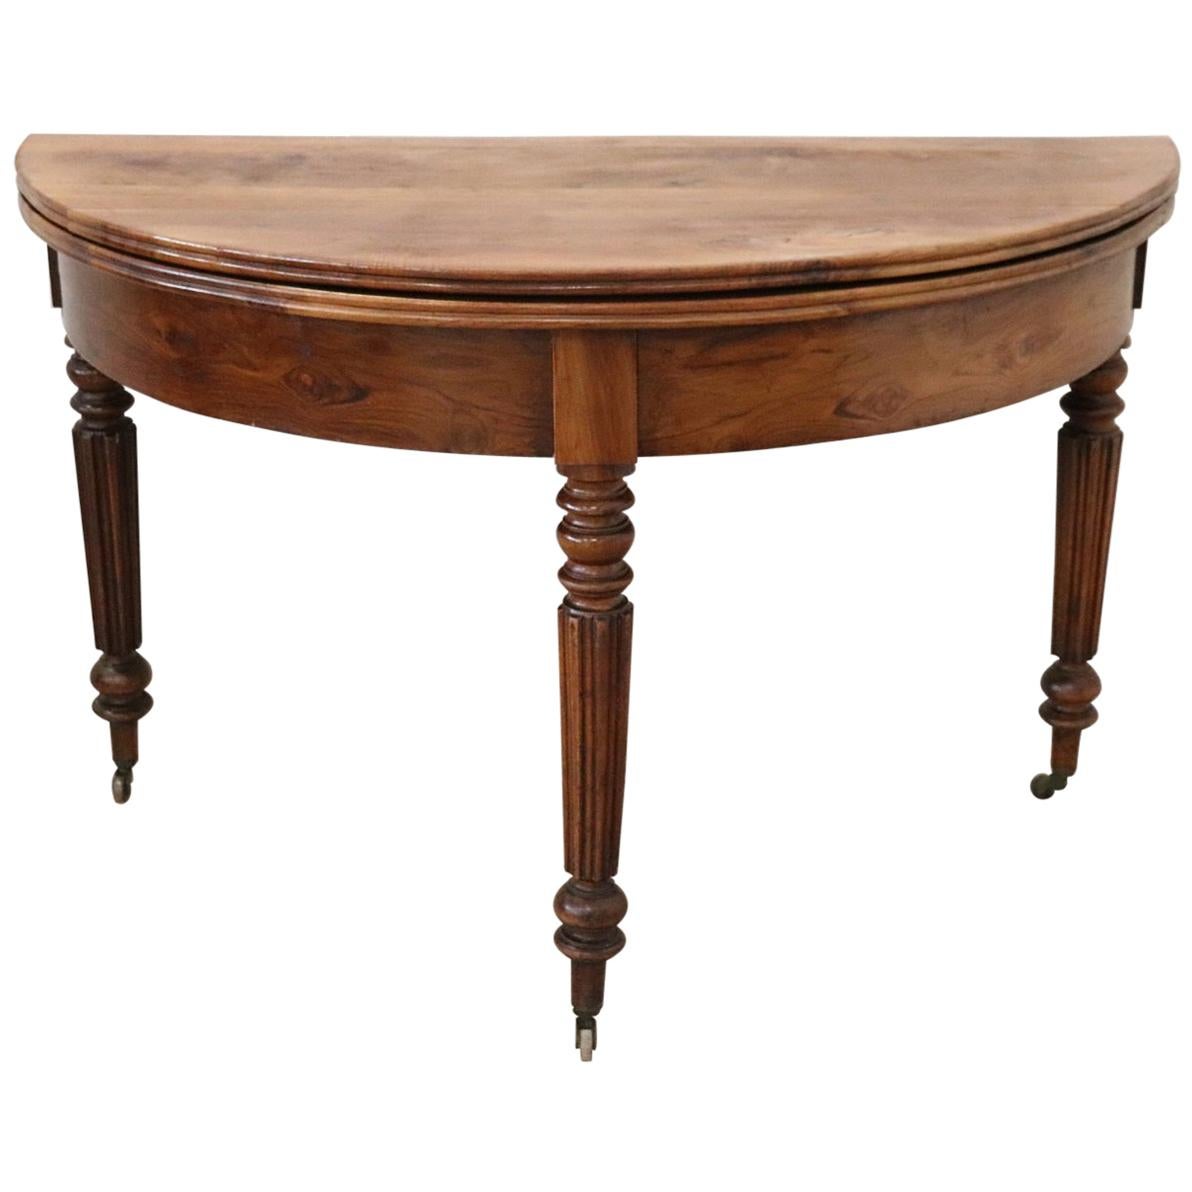 19th Century French Walnut Demilune Table or Dining Table